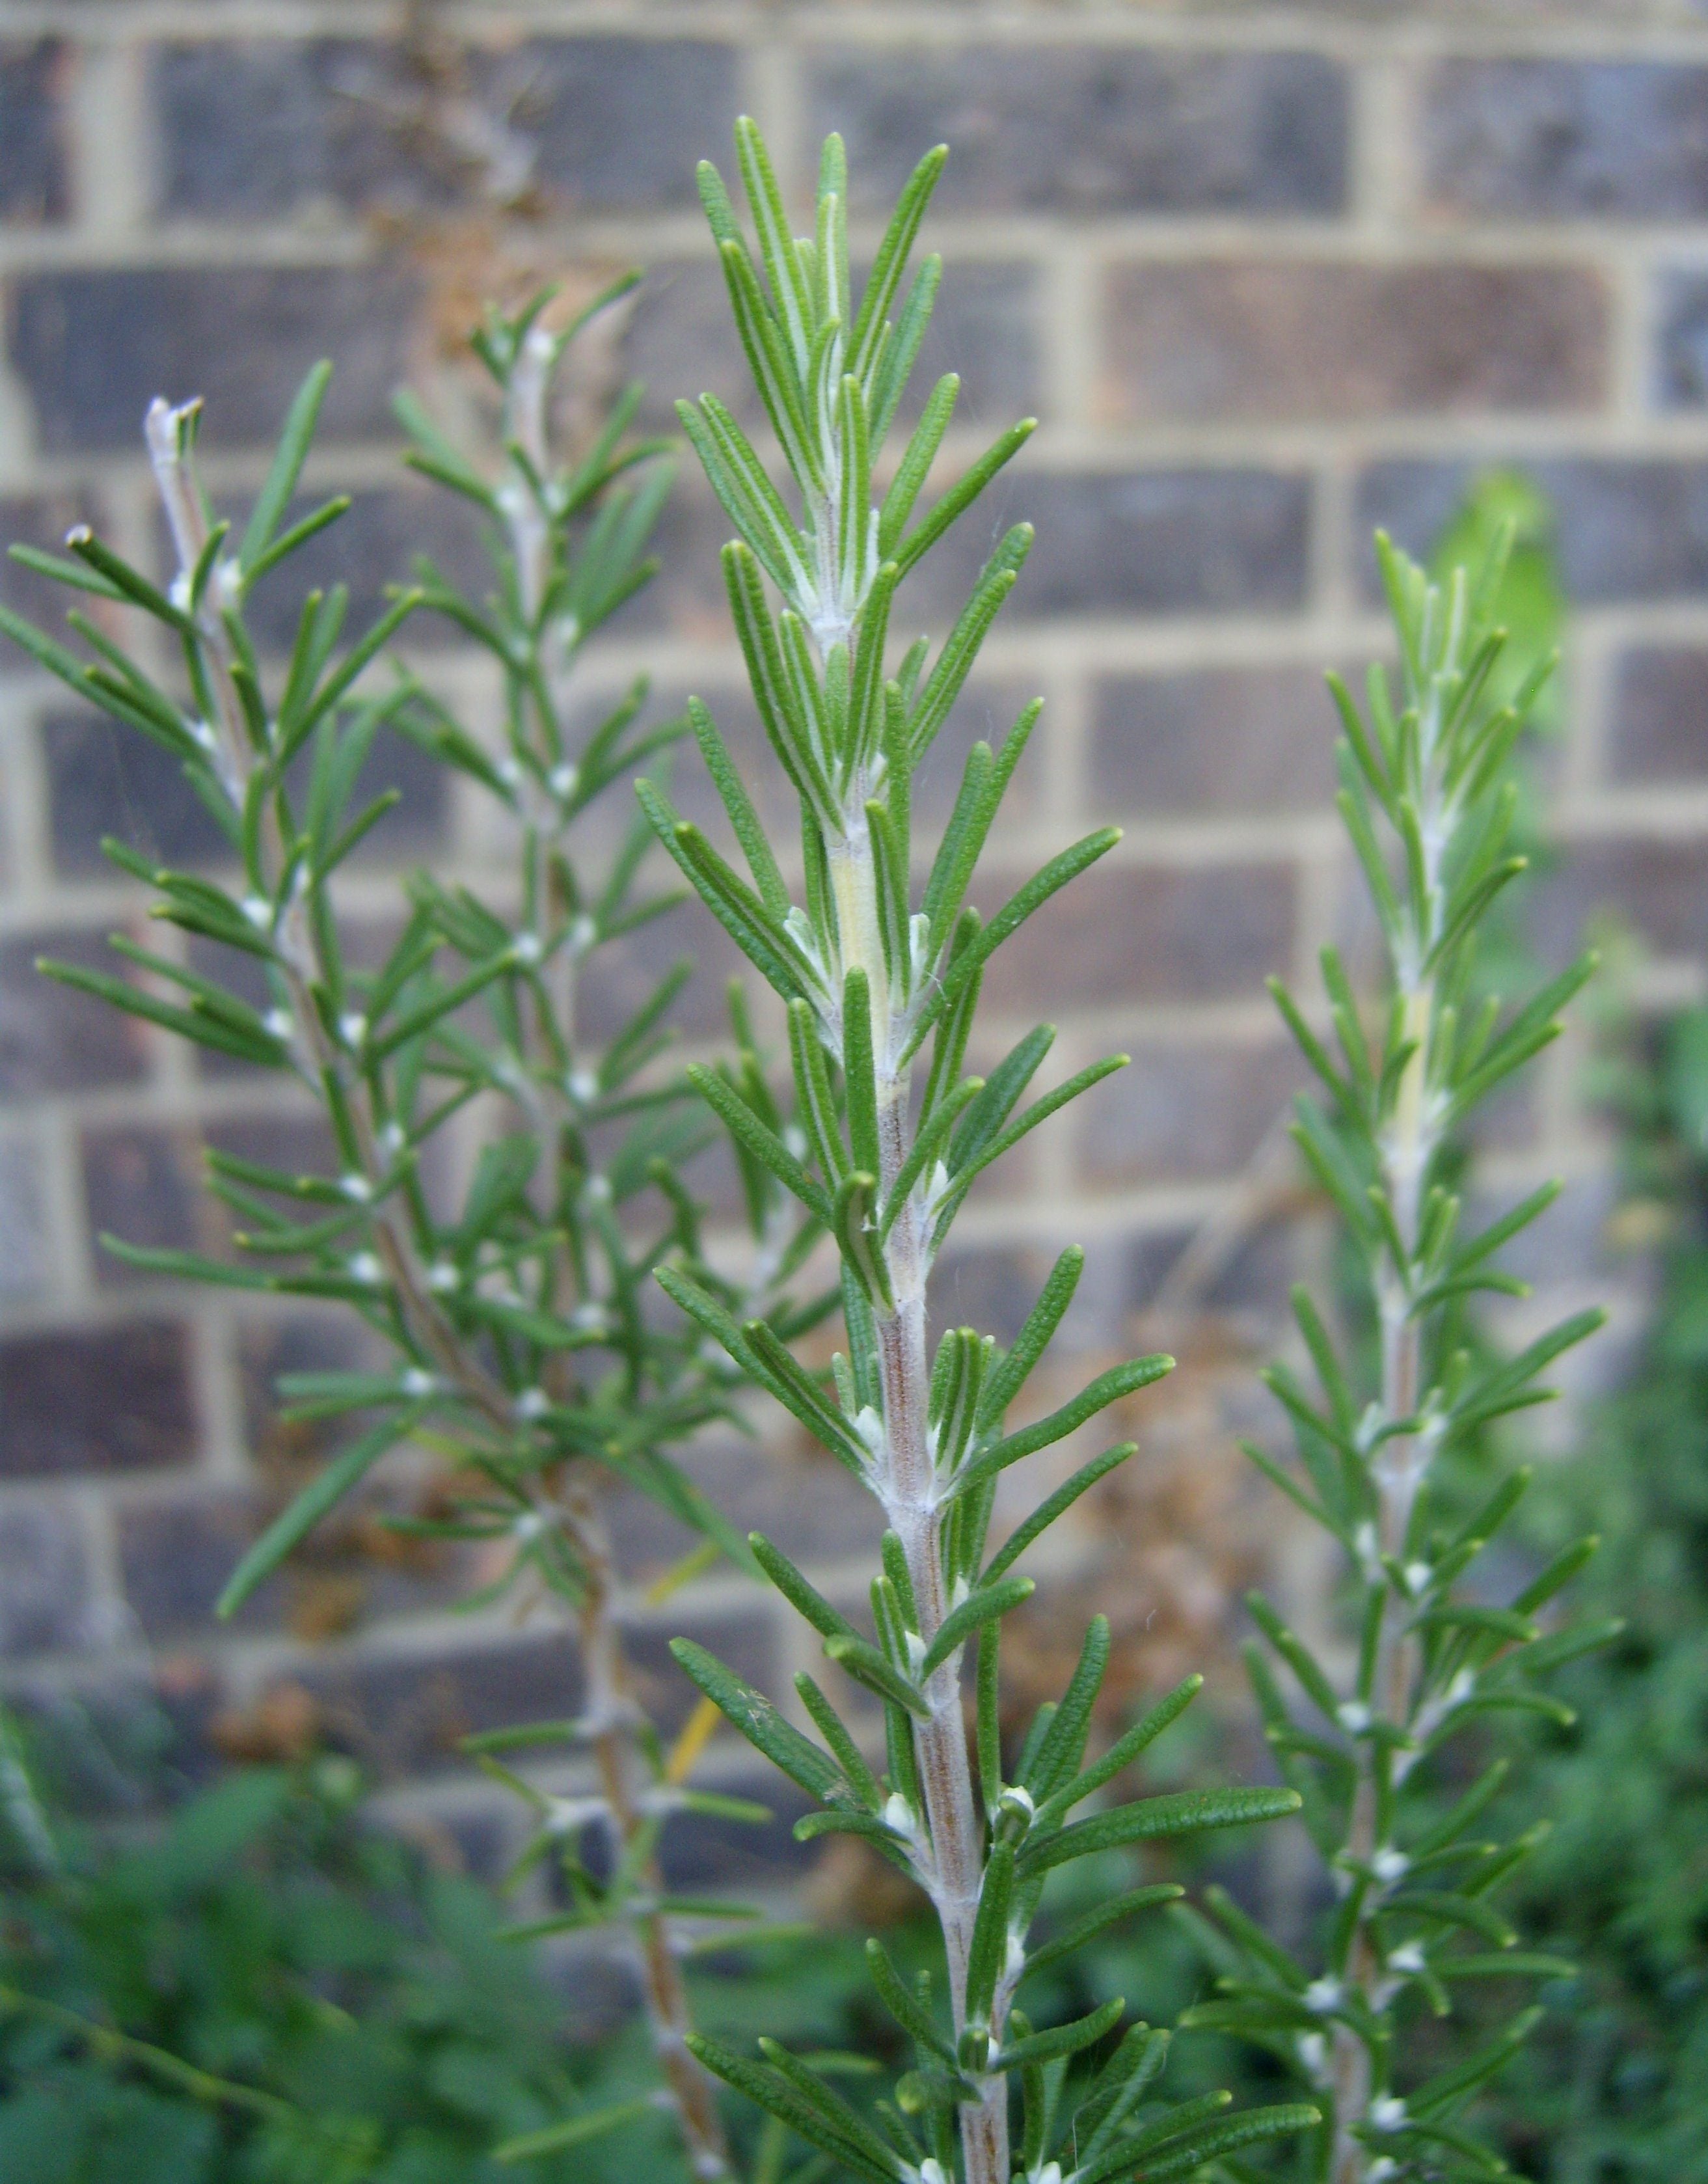 Rosemary Plant Care Guide: How to Grow Rosemary